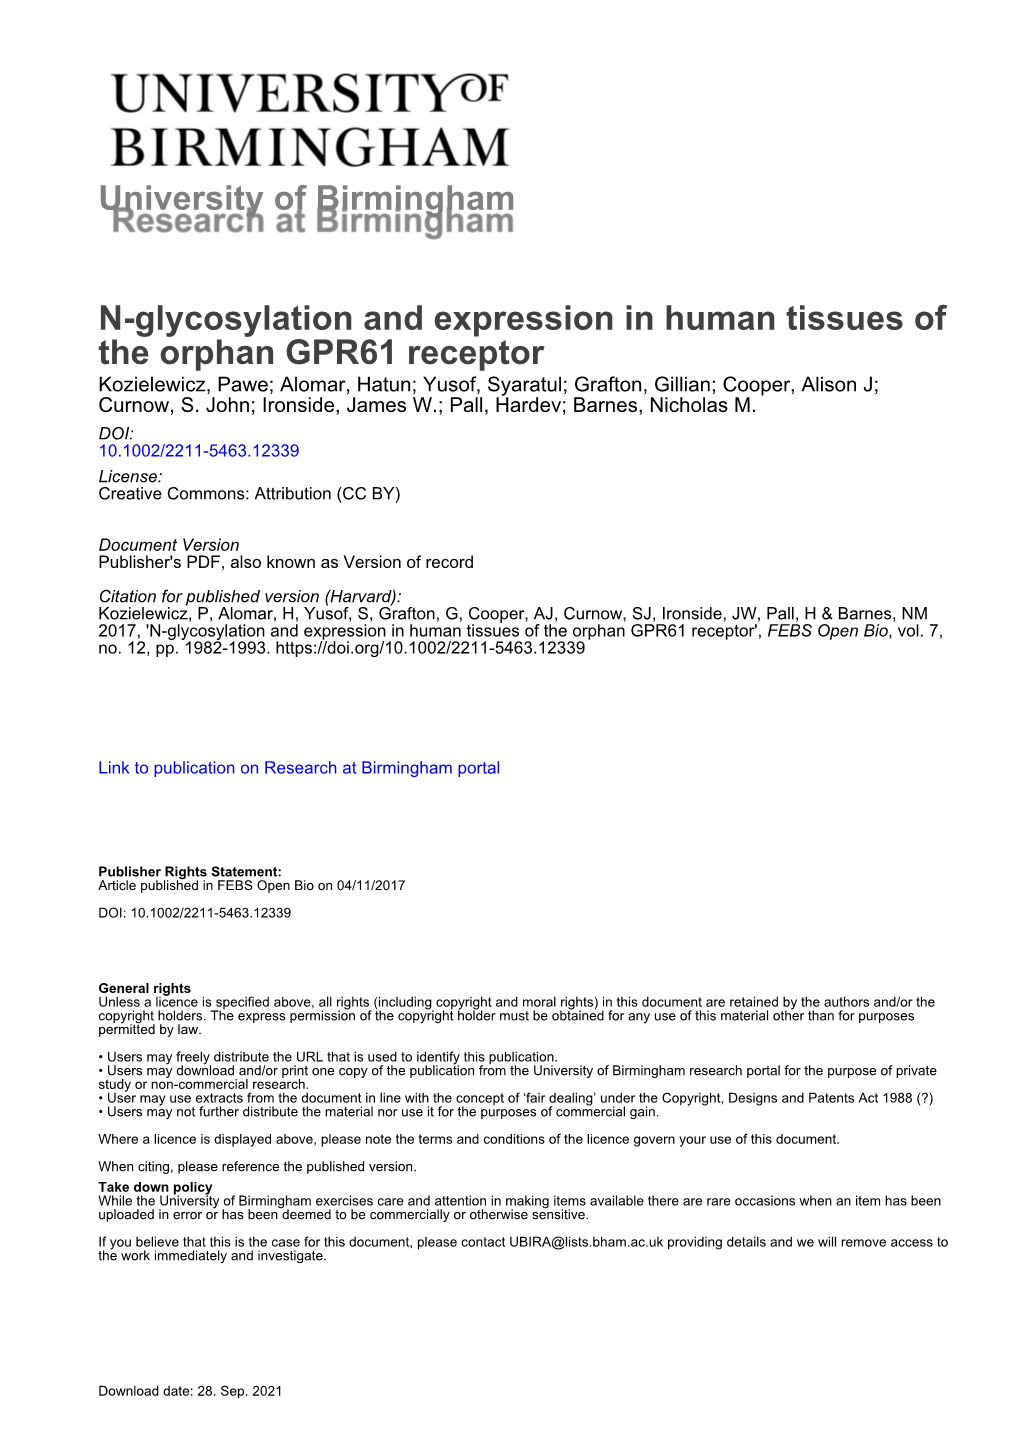 Glycosylation and Expression in Human Tissues Of